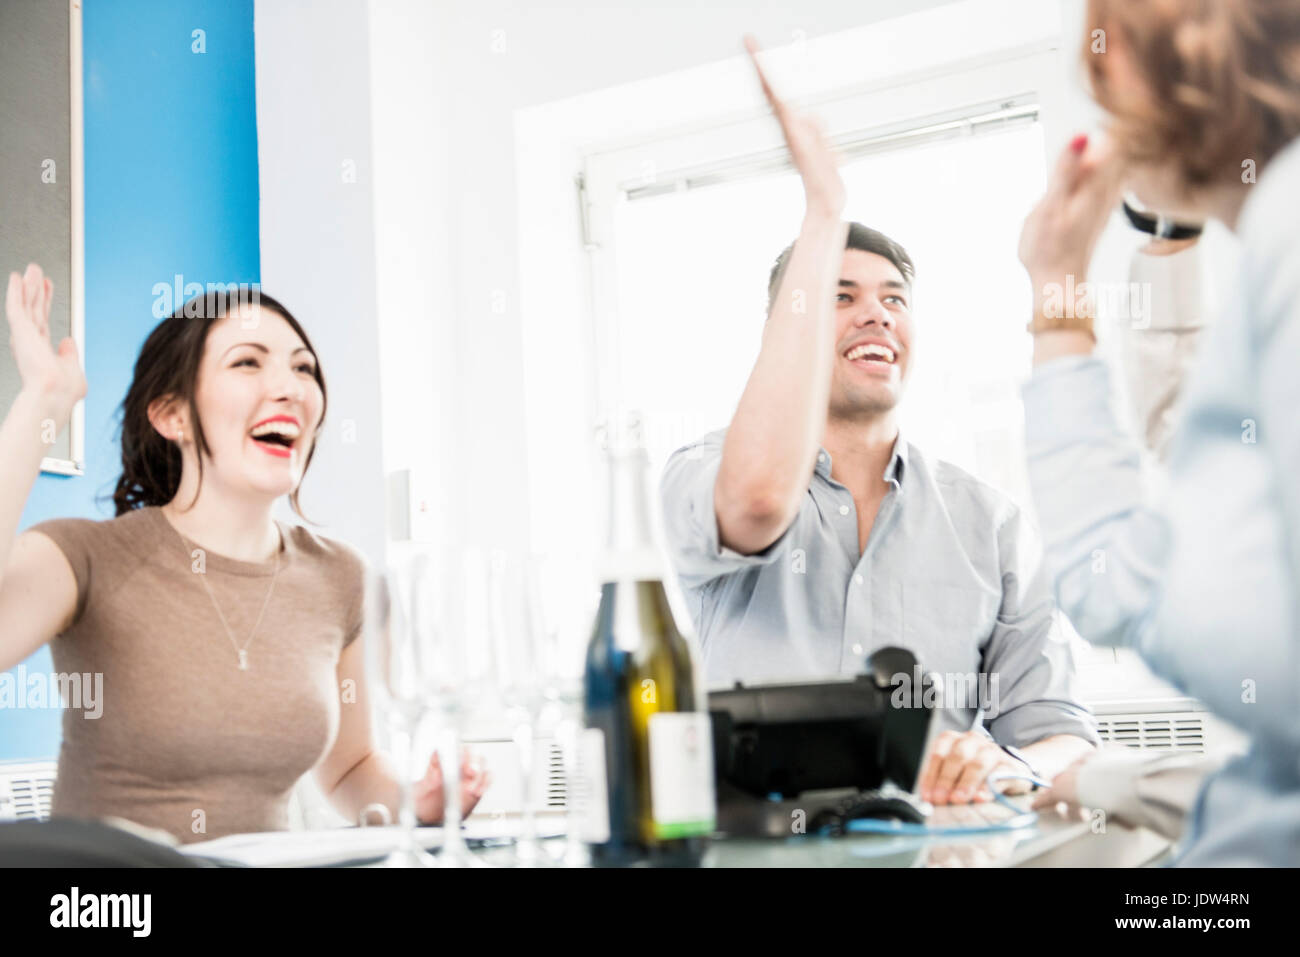 Colleagues giving high fives in office, champagne on table Stock Photo